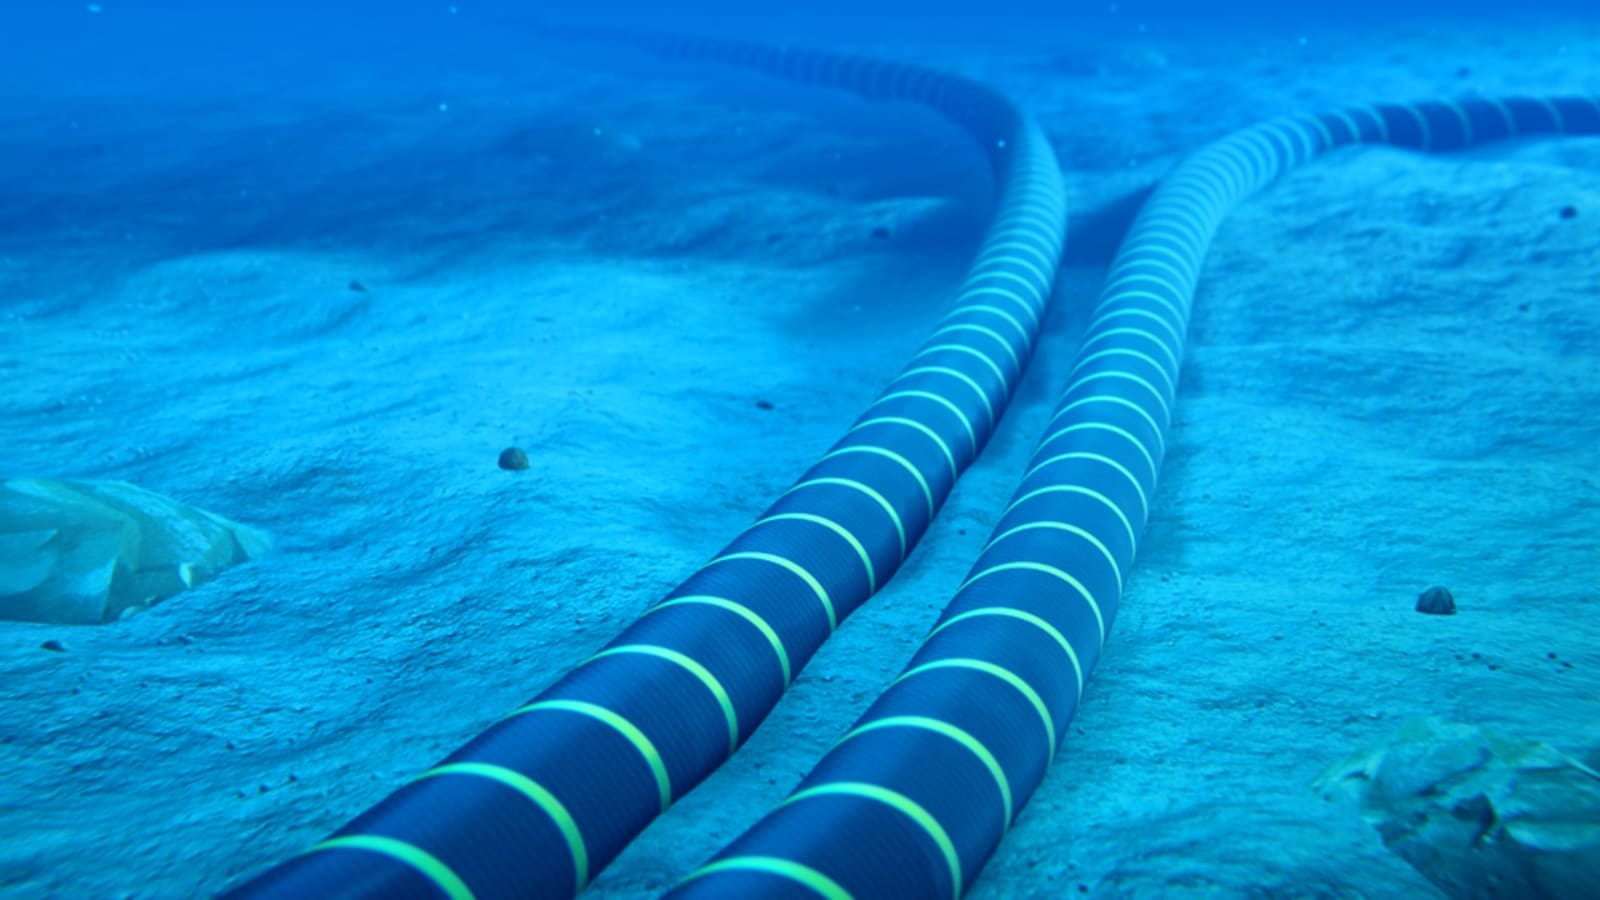 MC Explains | How does the damage to undersea cables in Red Sea impact  India?